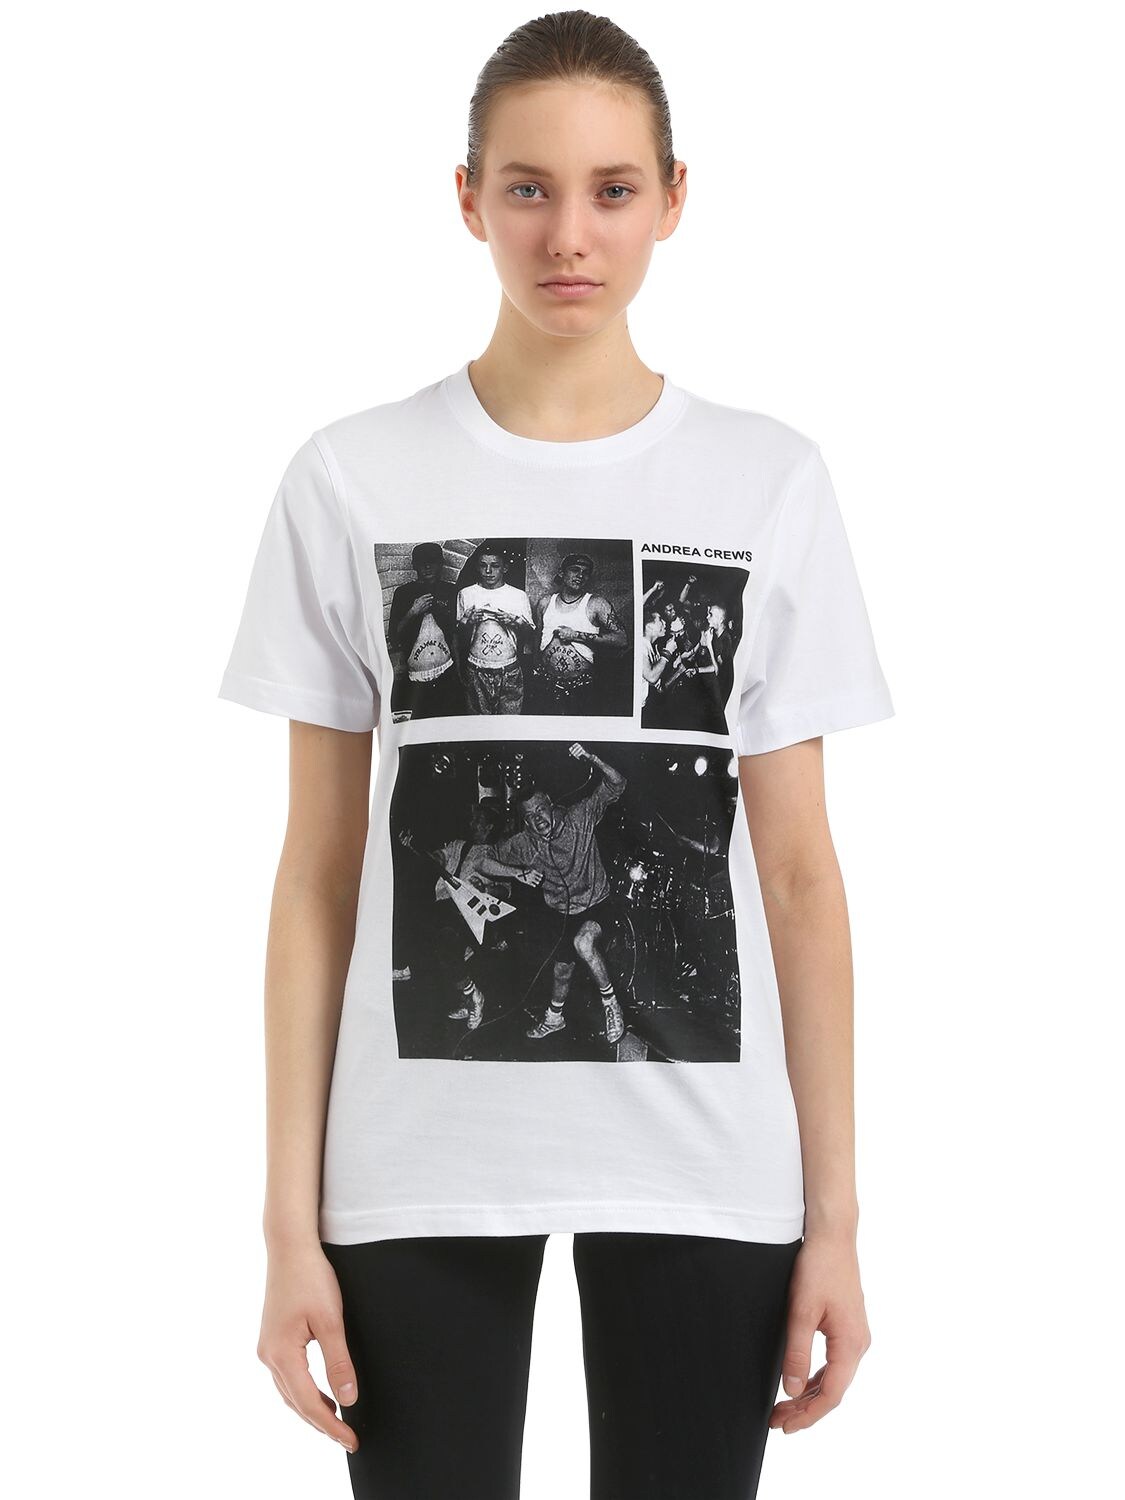 Andrea Crews Pablo Cots Minor Threat Jersey T-shirt In White